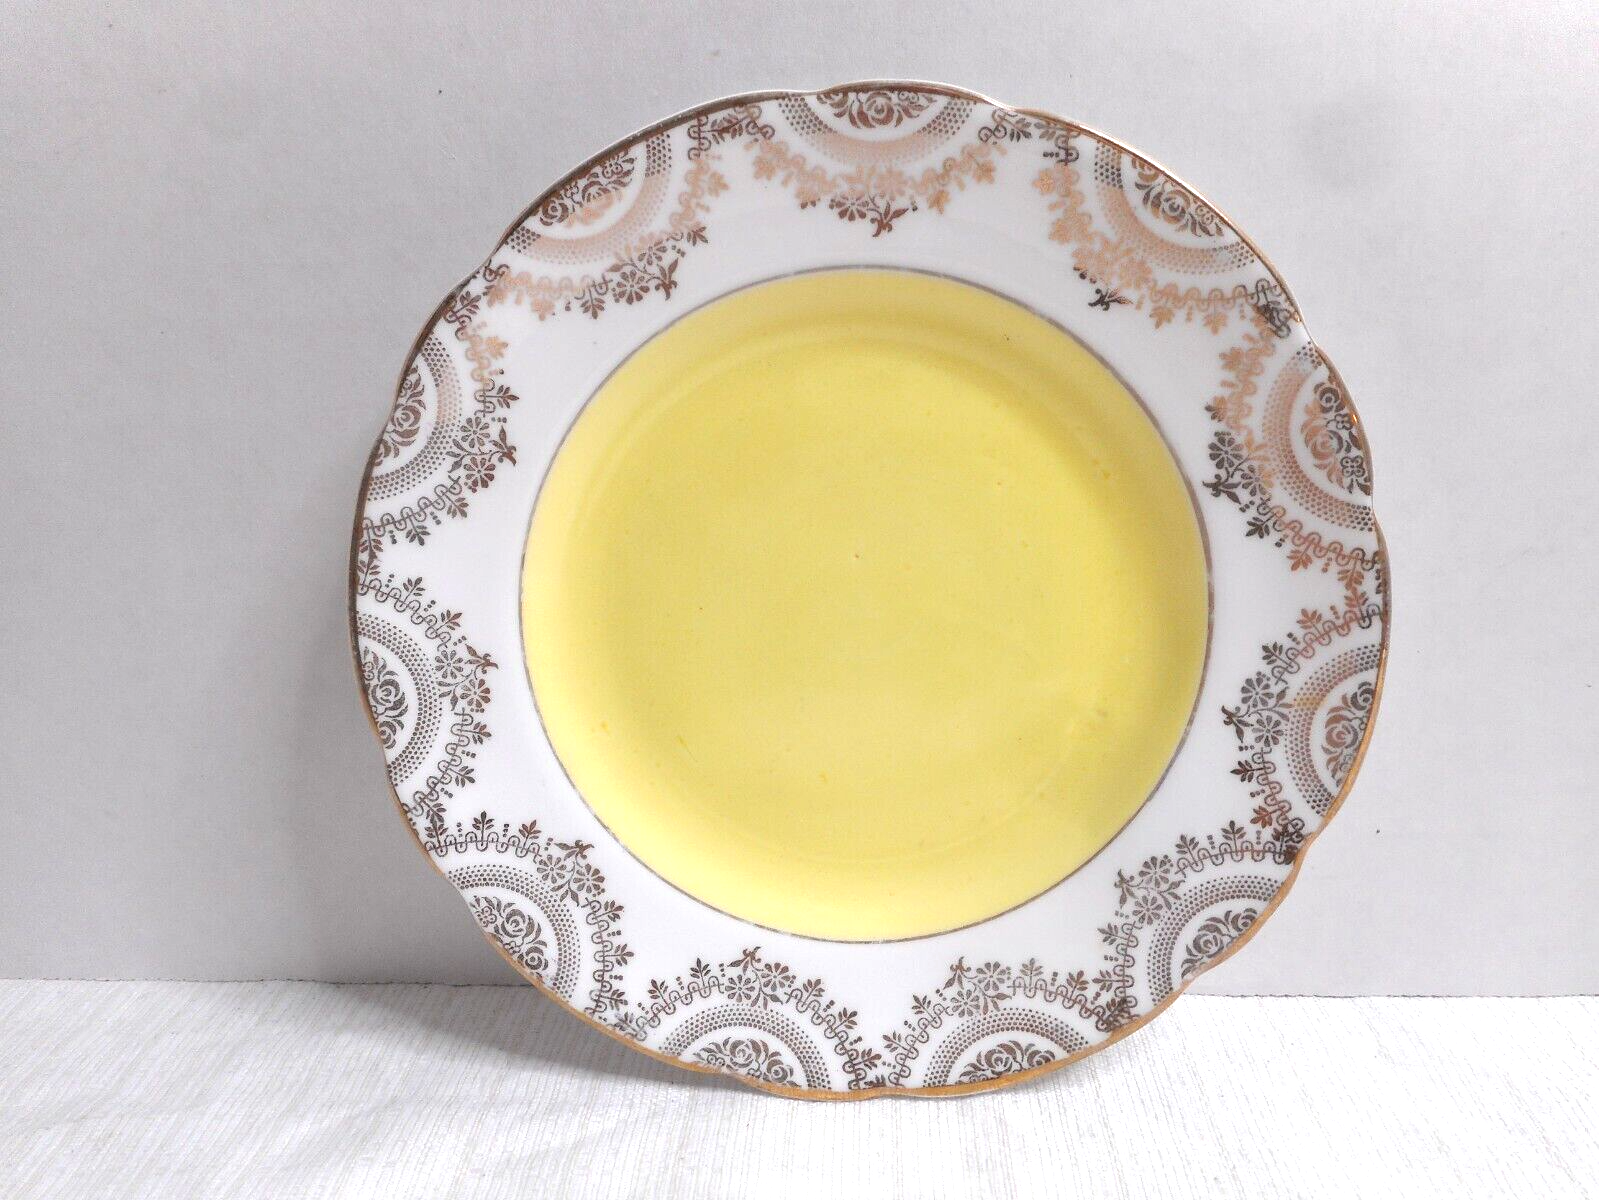 Primary image for Bone China Bread/Butter Plate Yellow & White Gold Royal Vale Gilt Design ENGLAND